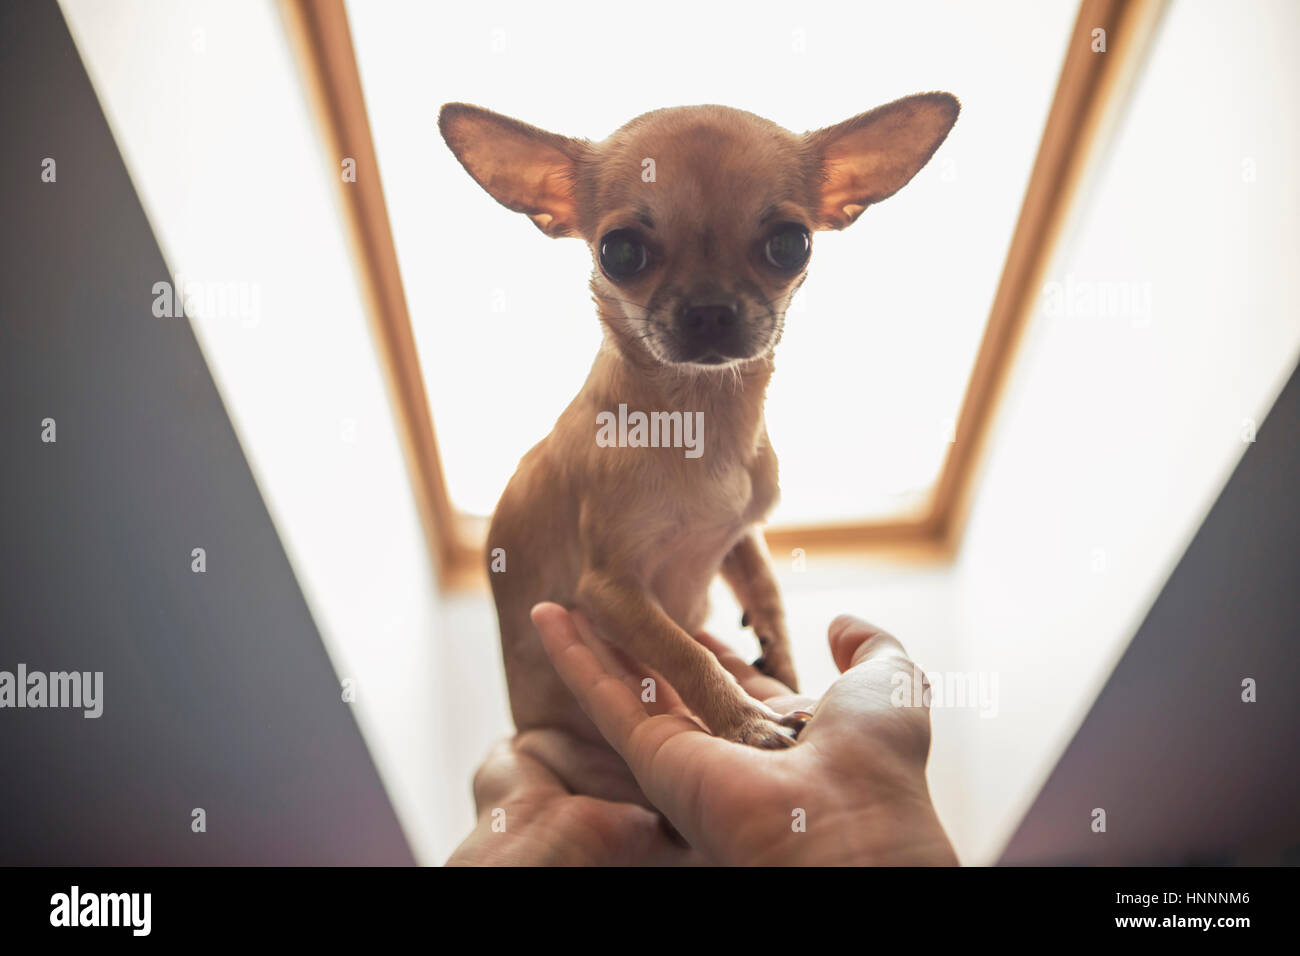 Girl With Chihuahua High Resolution Stock Photography and Images - Alamy